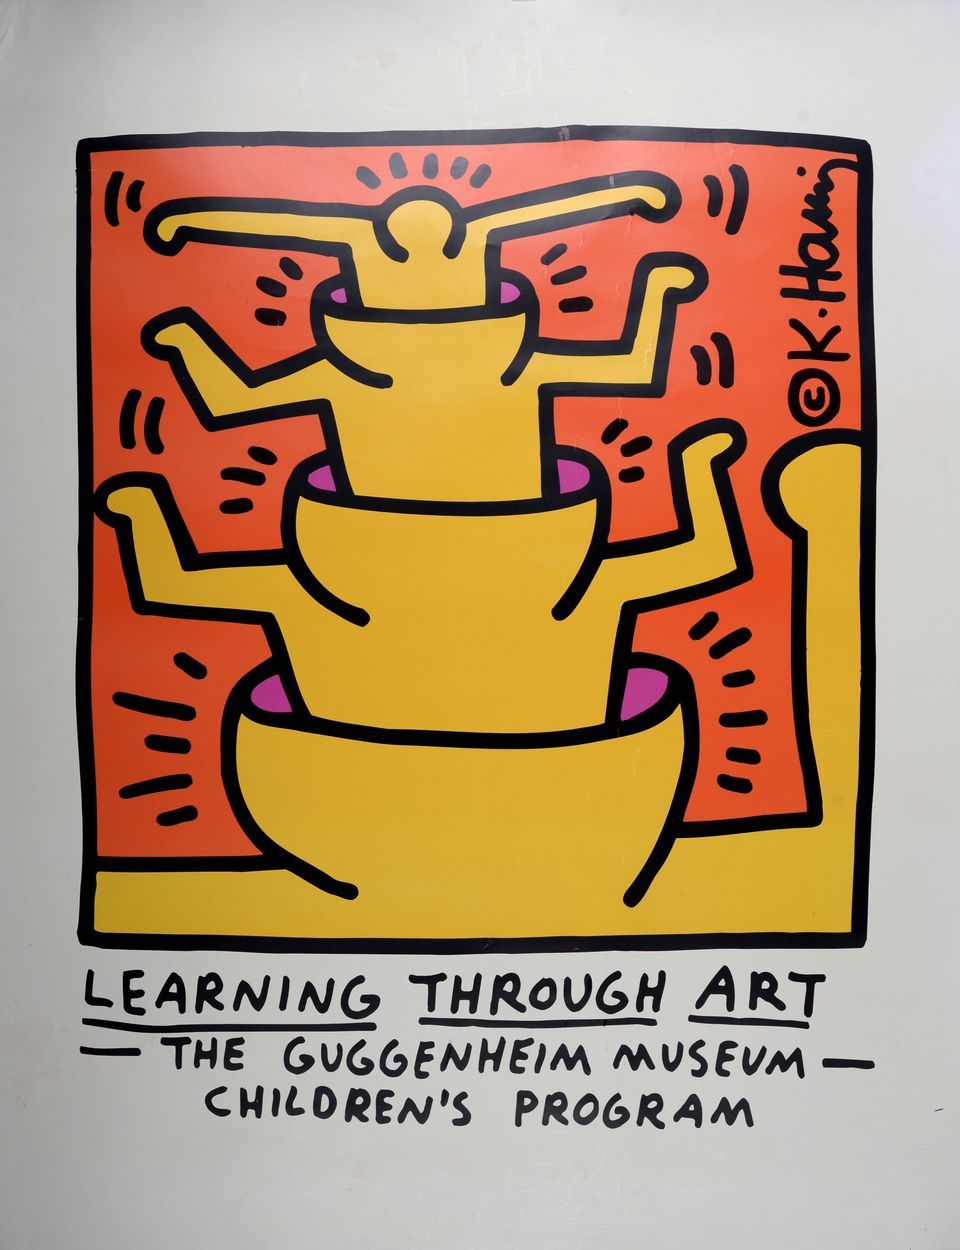 KEITH HARING Keith Haring (After)

Learning Through Art (Guggenheim Museum), c. &hellip;